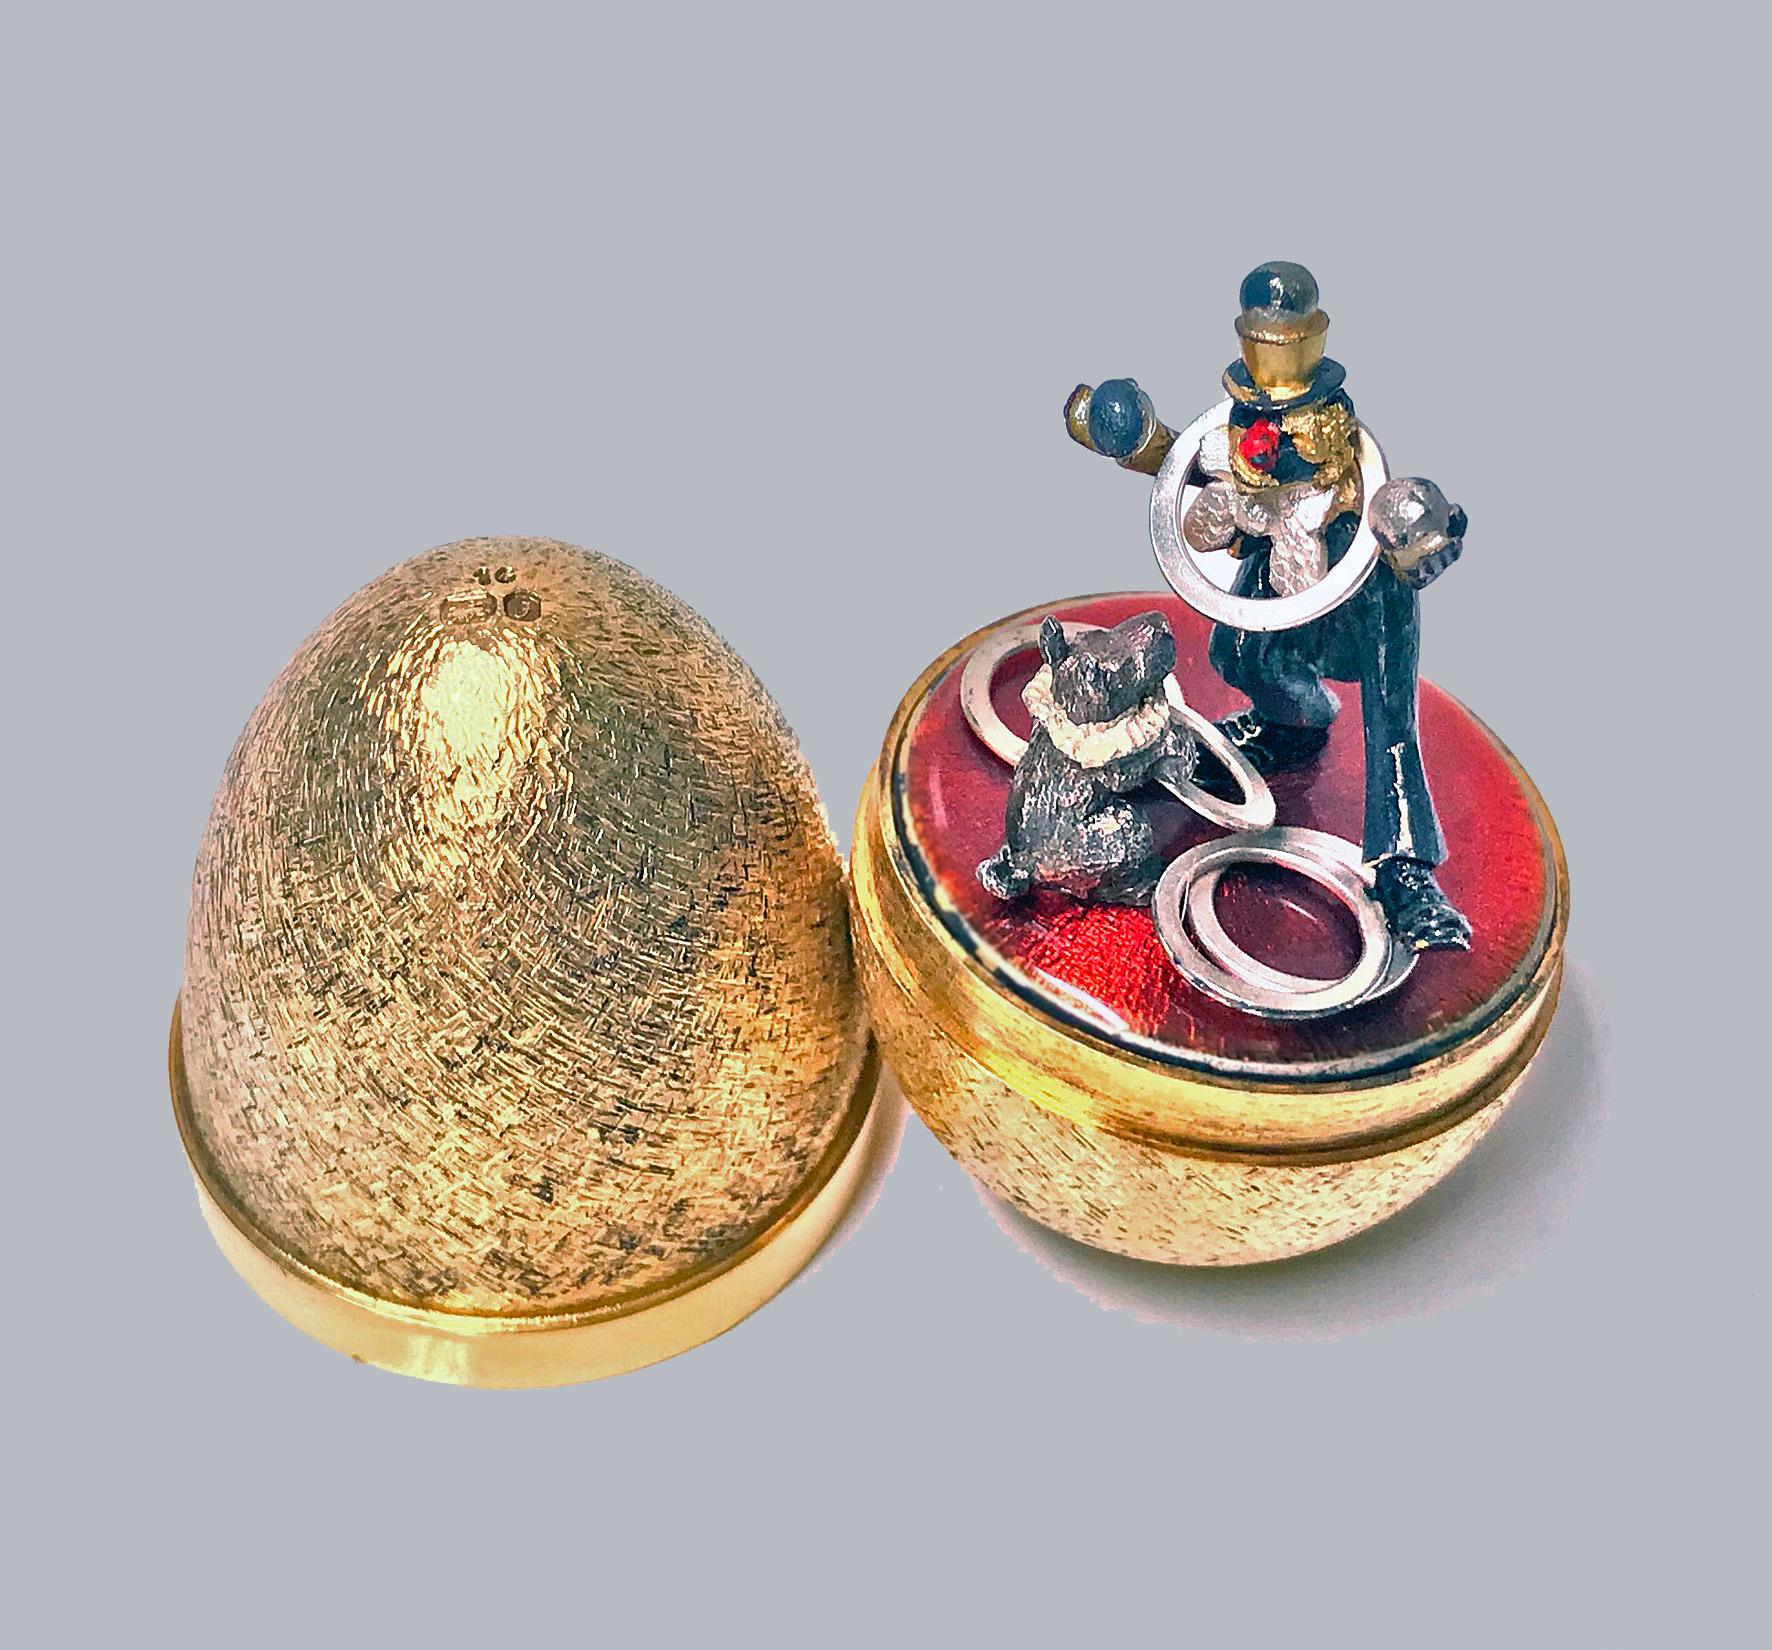 Stuart Devlin silver gilt surprise egg, London 1980, opening to reveal a clown and performing dog. Original box and papers. Height: 7.5cm high, No 19 of limited edition of 100. Item Weight: 131 grams.